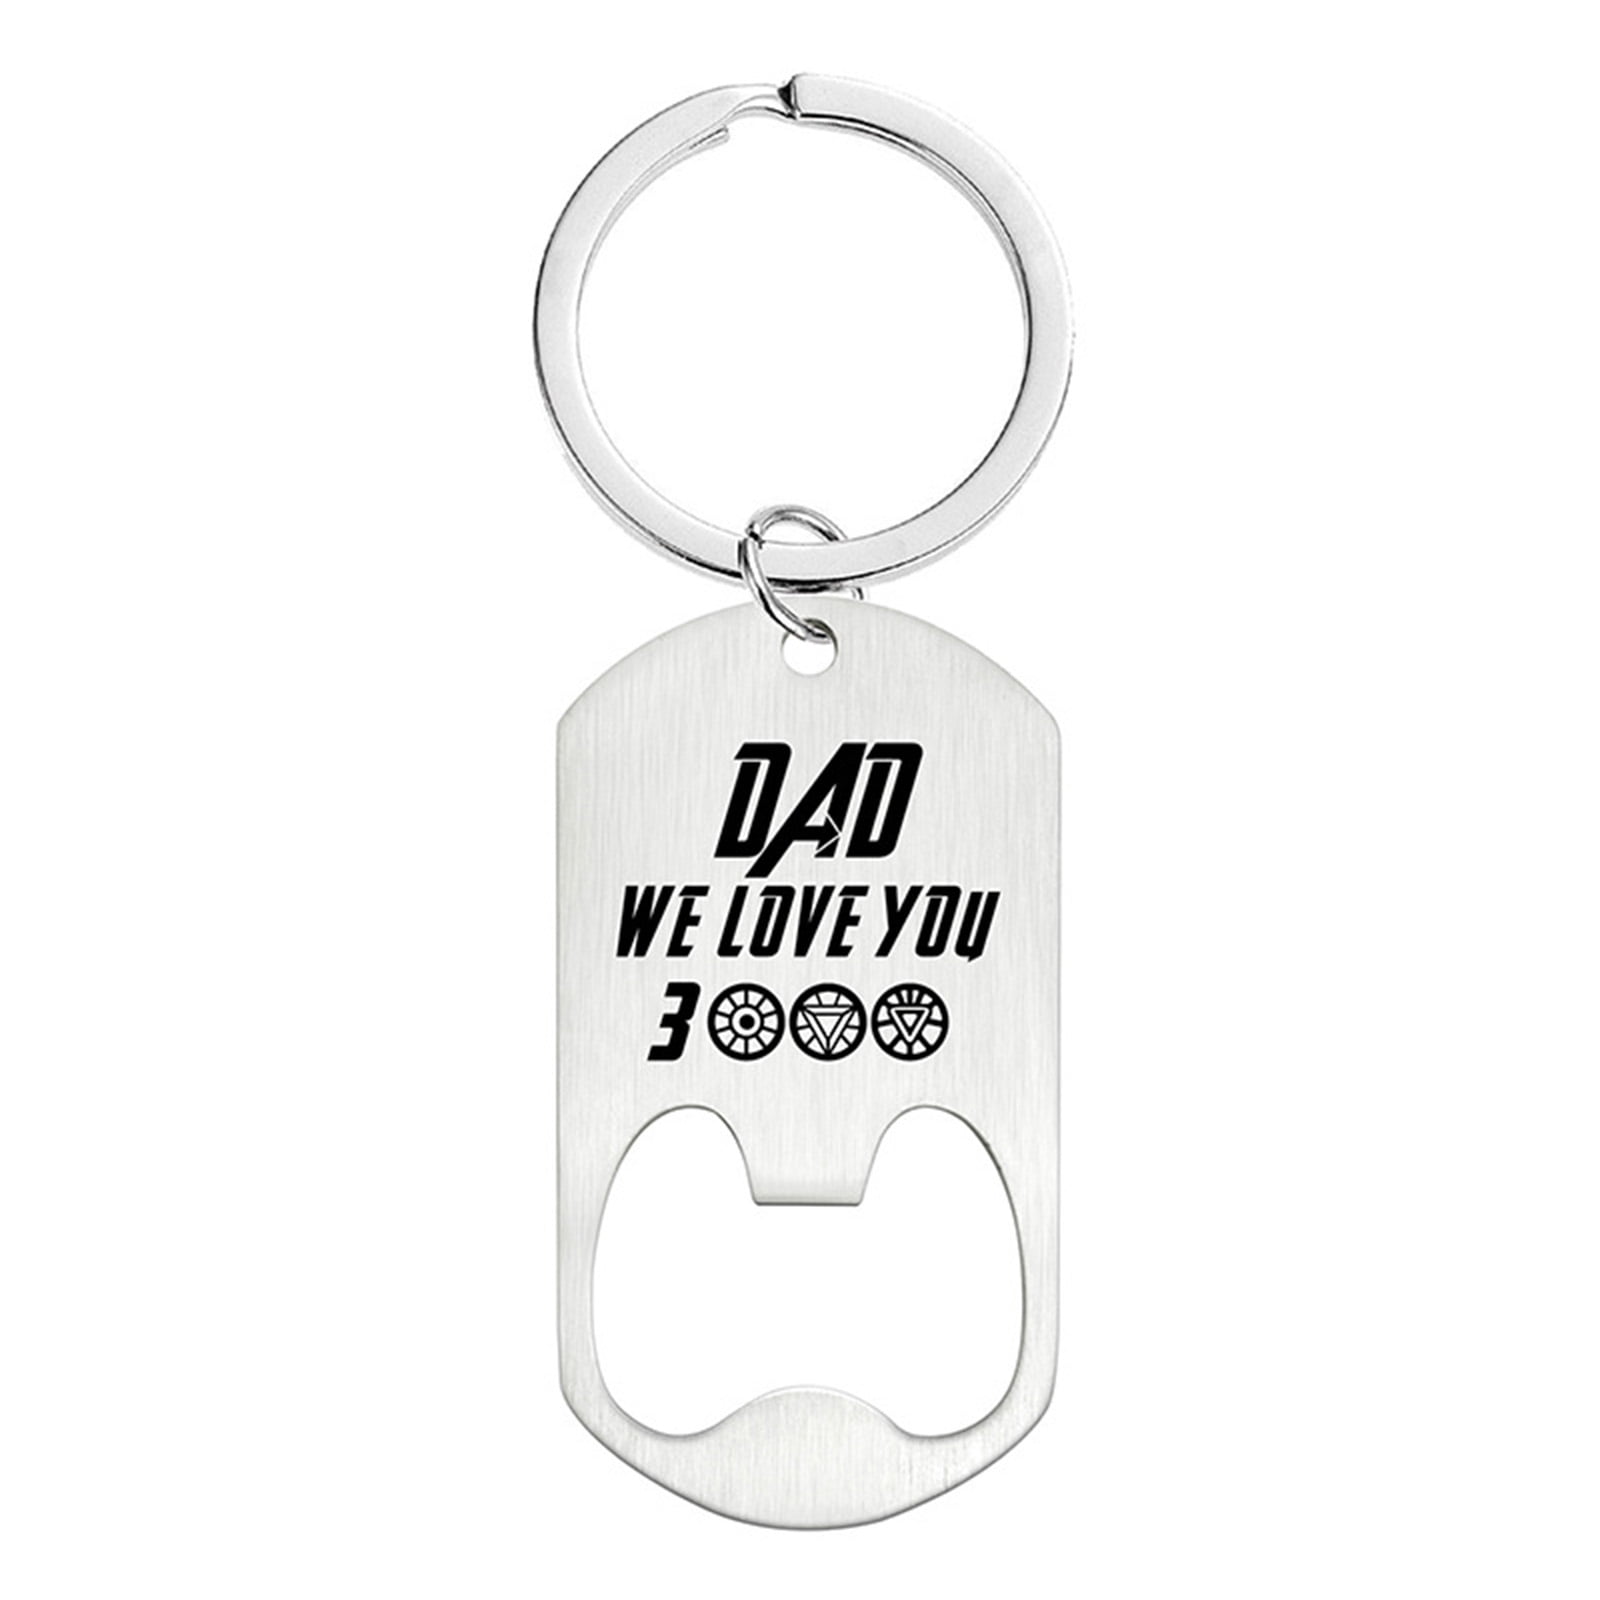 THE BEST DAD PEN AND BOTTLE OPENER KEYRING FATHERS DAY GIFT PRESENT 